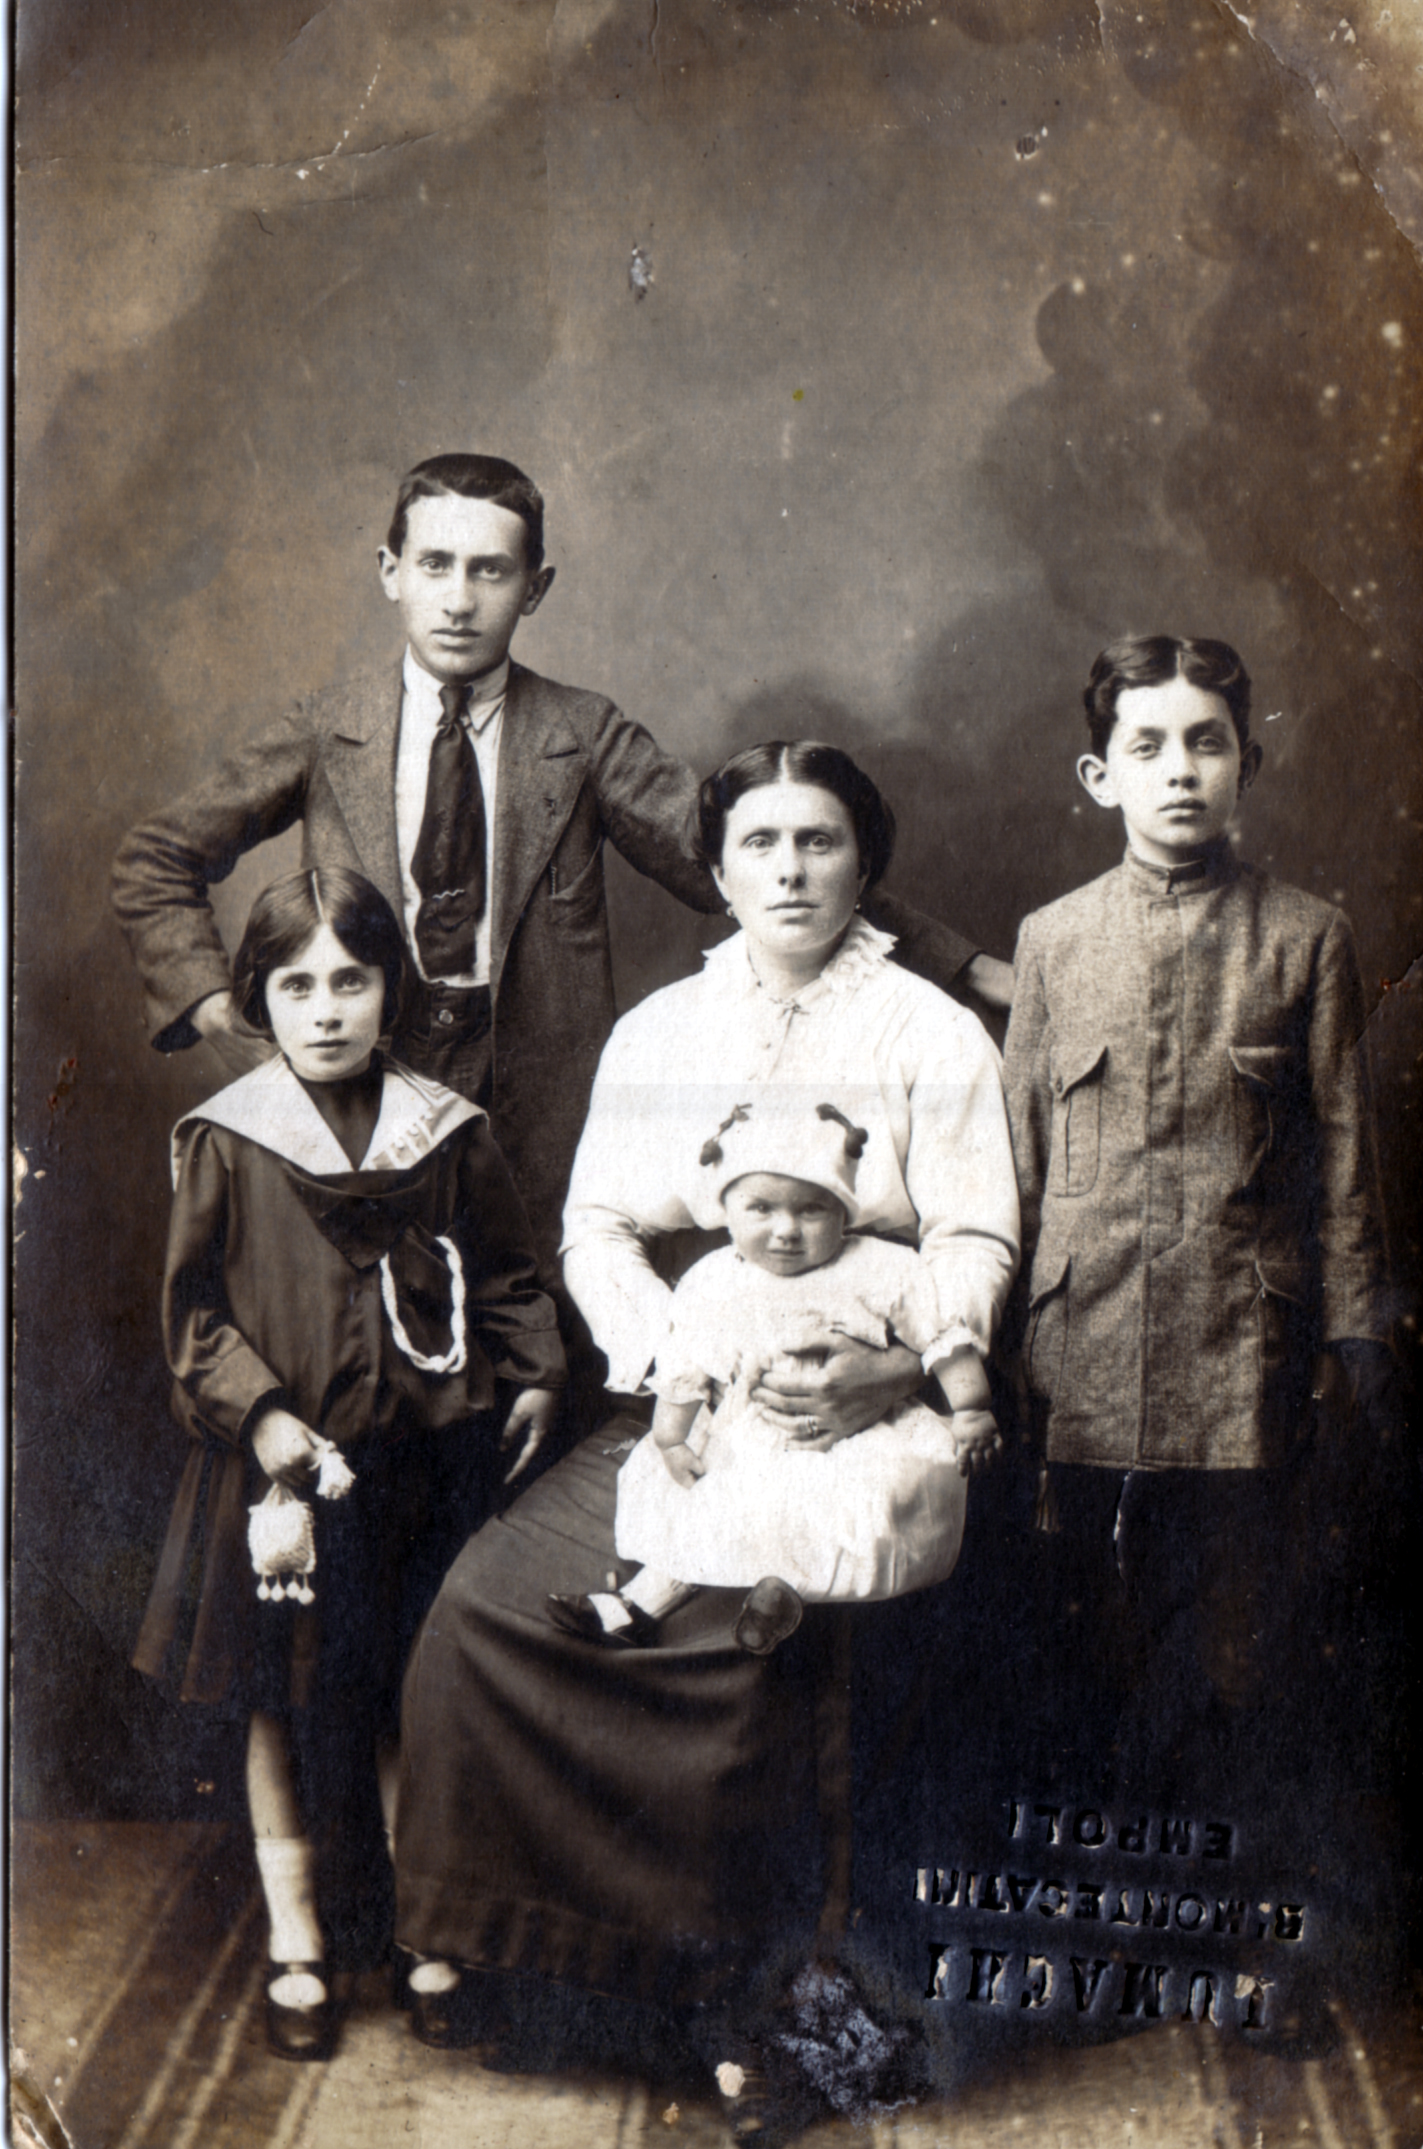 Palagini Family on 1916 or 1917